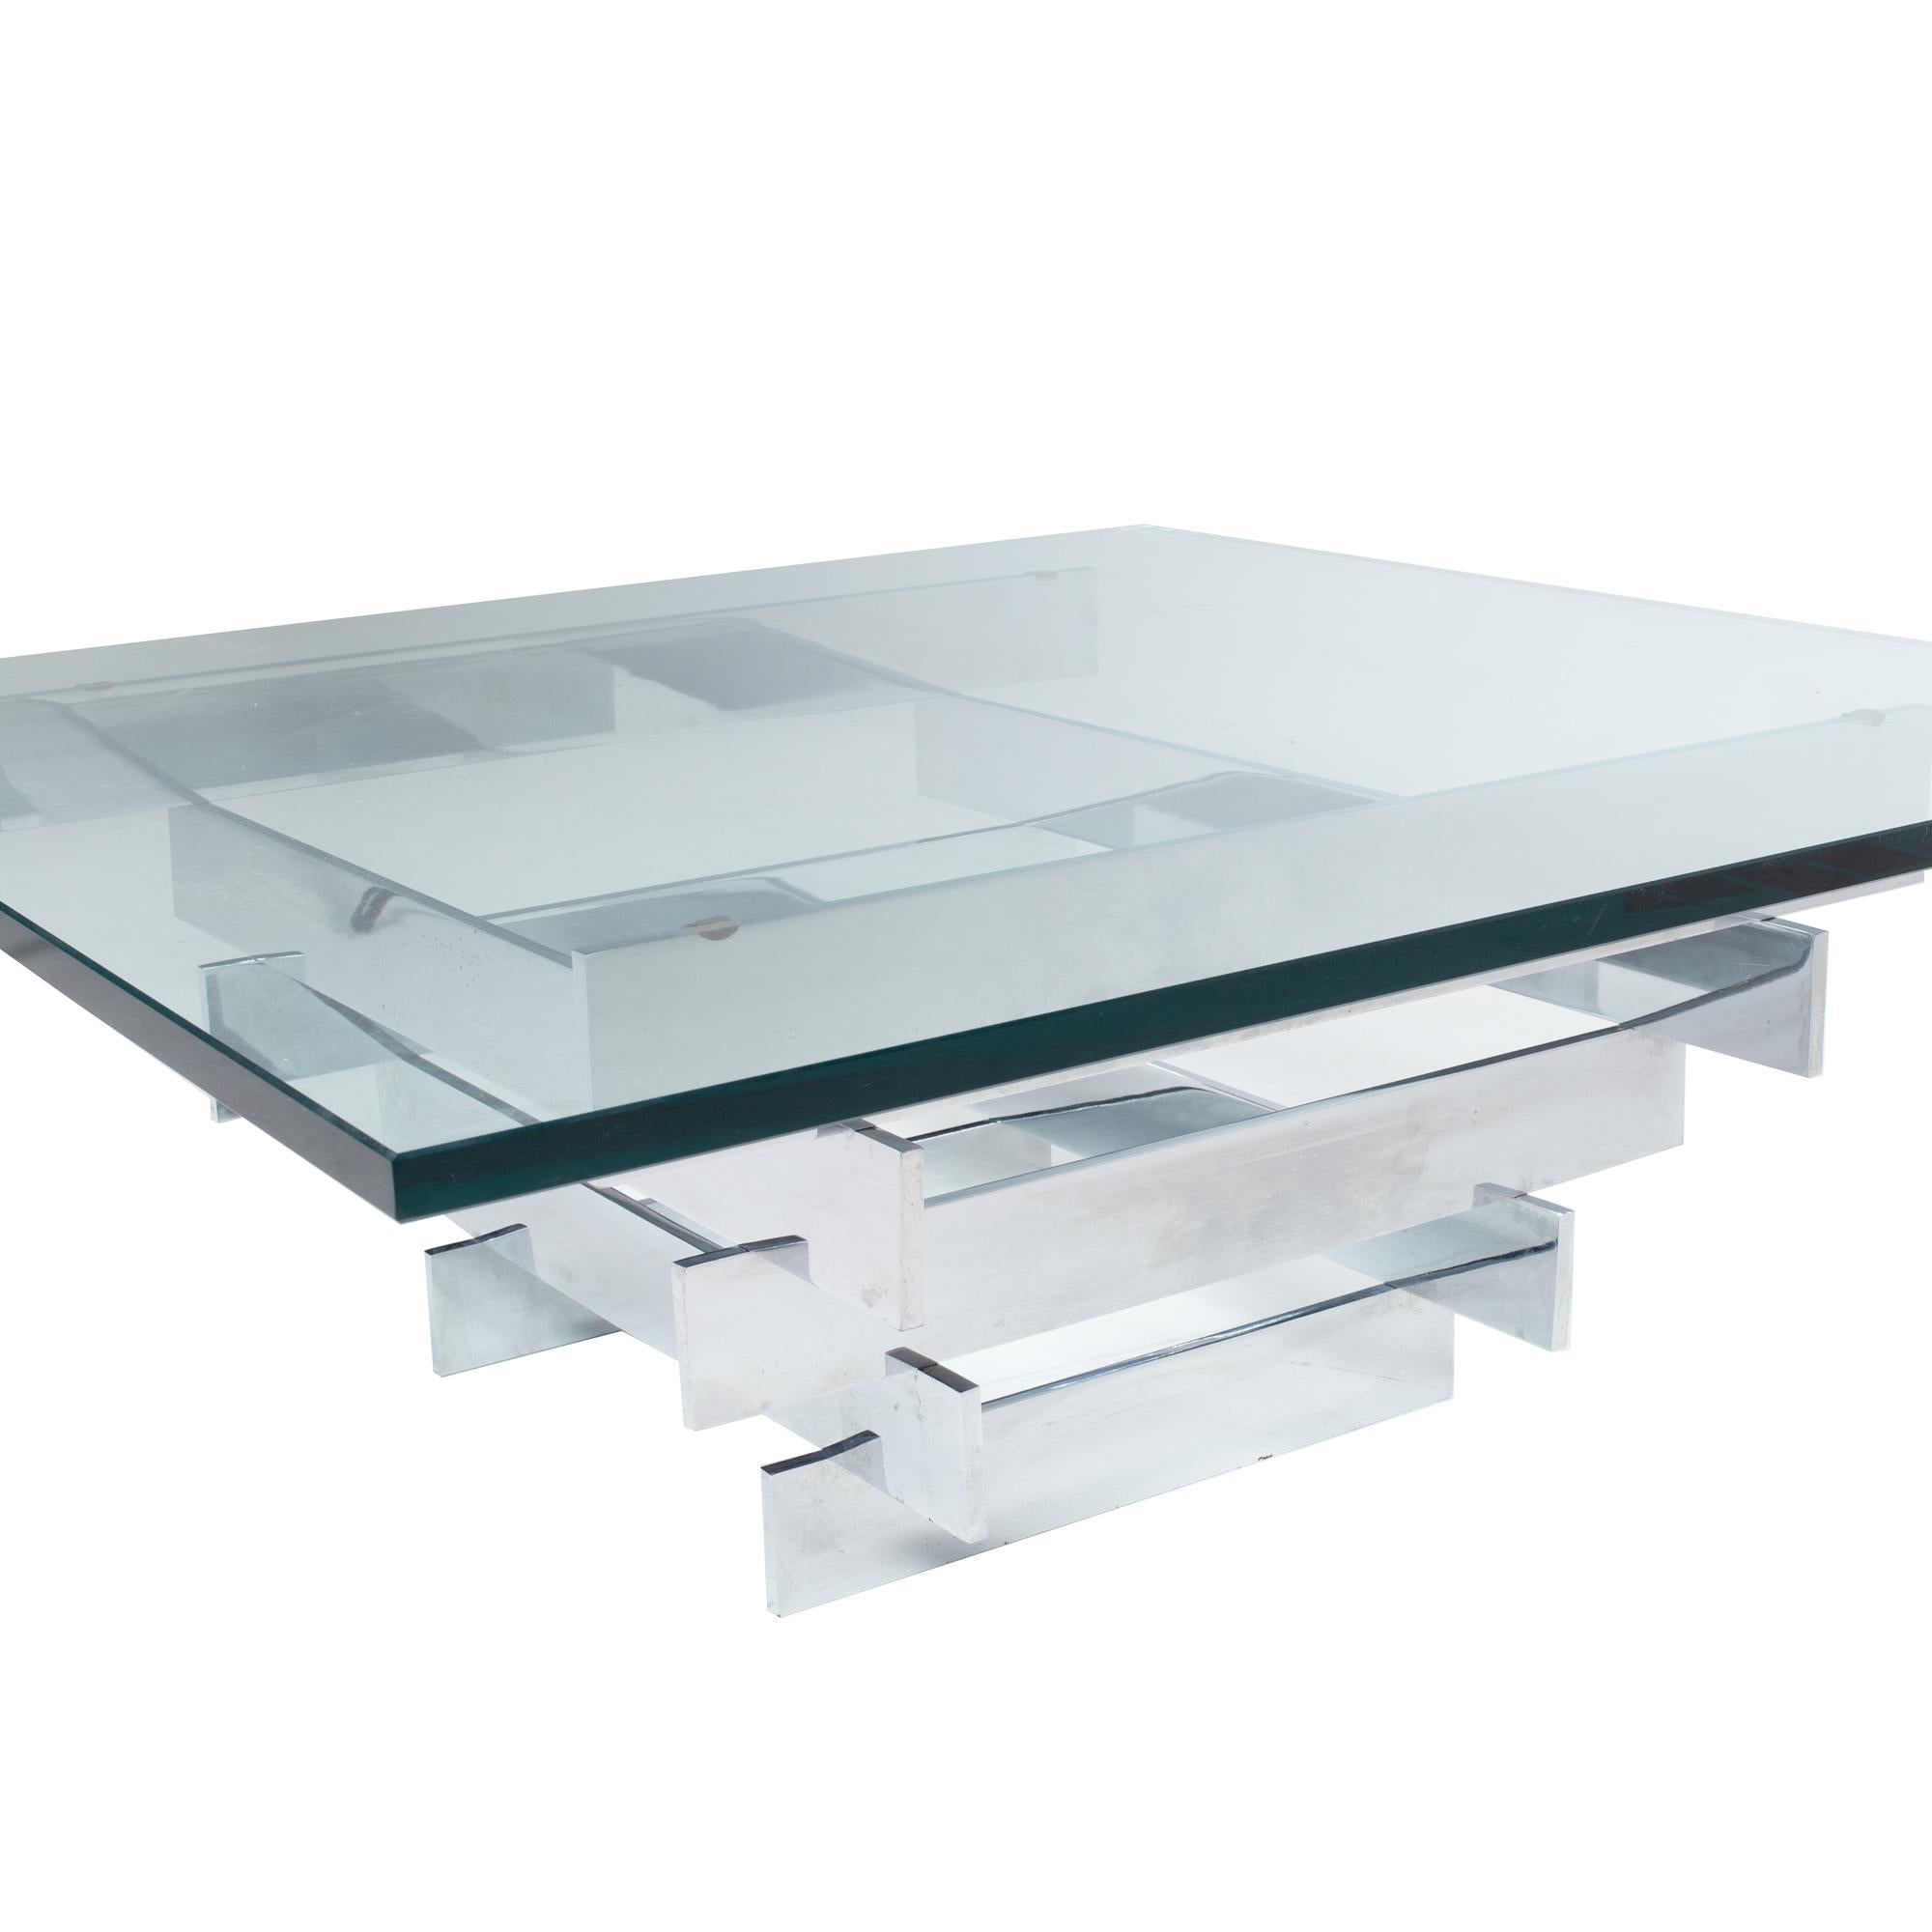 Paul Mayen for Habitat Midcentury Chrome and Glass Coffee Table In Good Condition For Sale In Countryside, IL